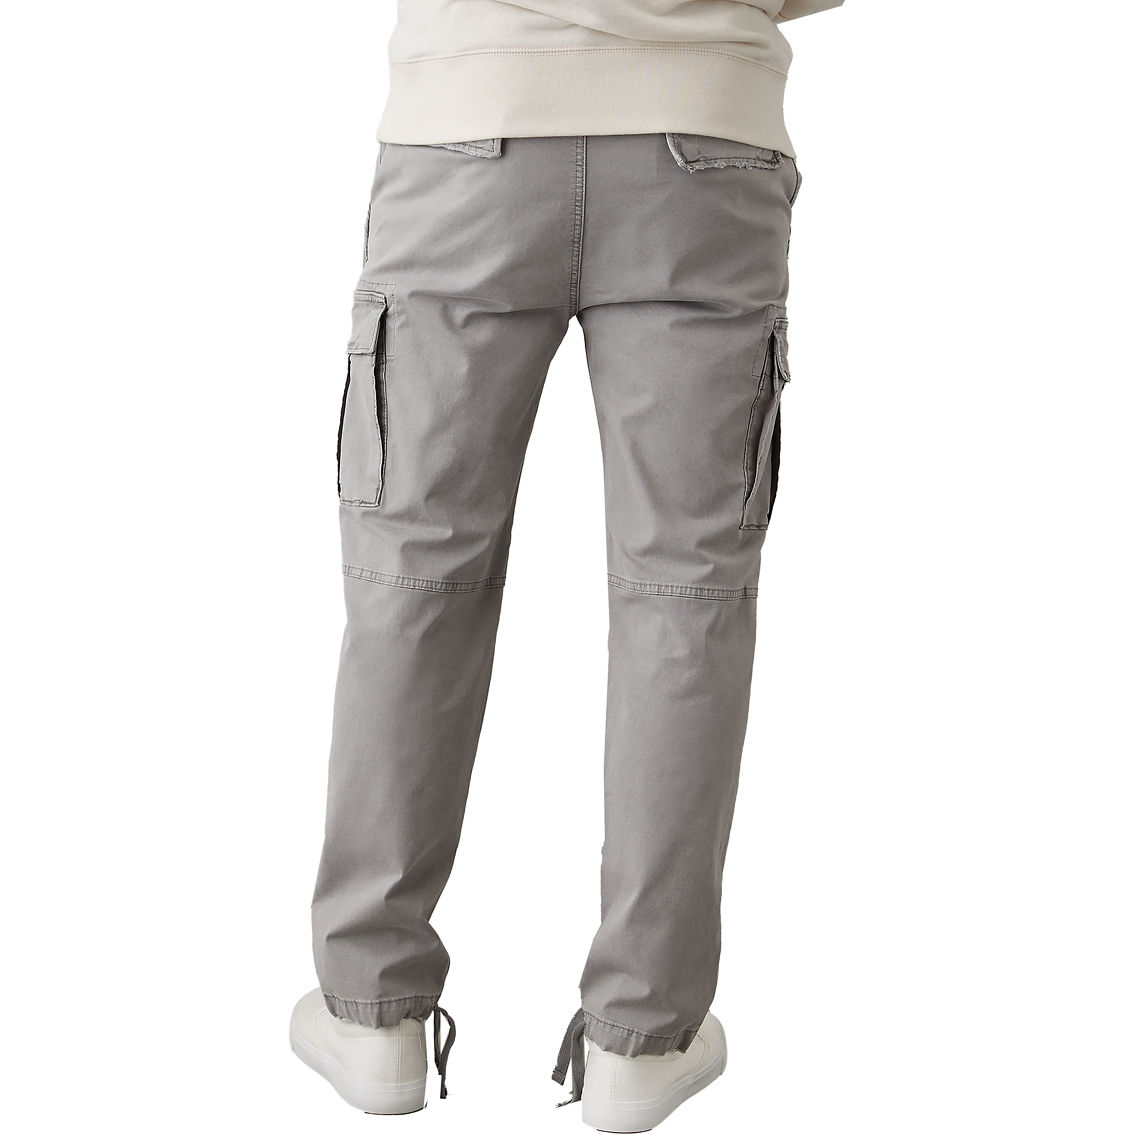 American Eagle AE Flex Slim Lived-In Cargo Pants - Image 2 of 5